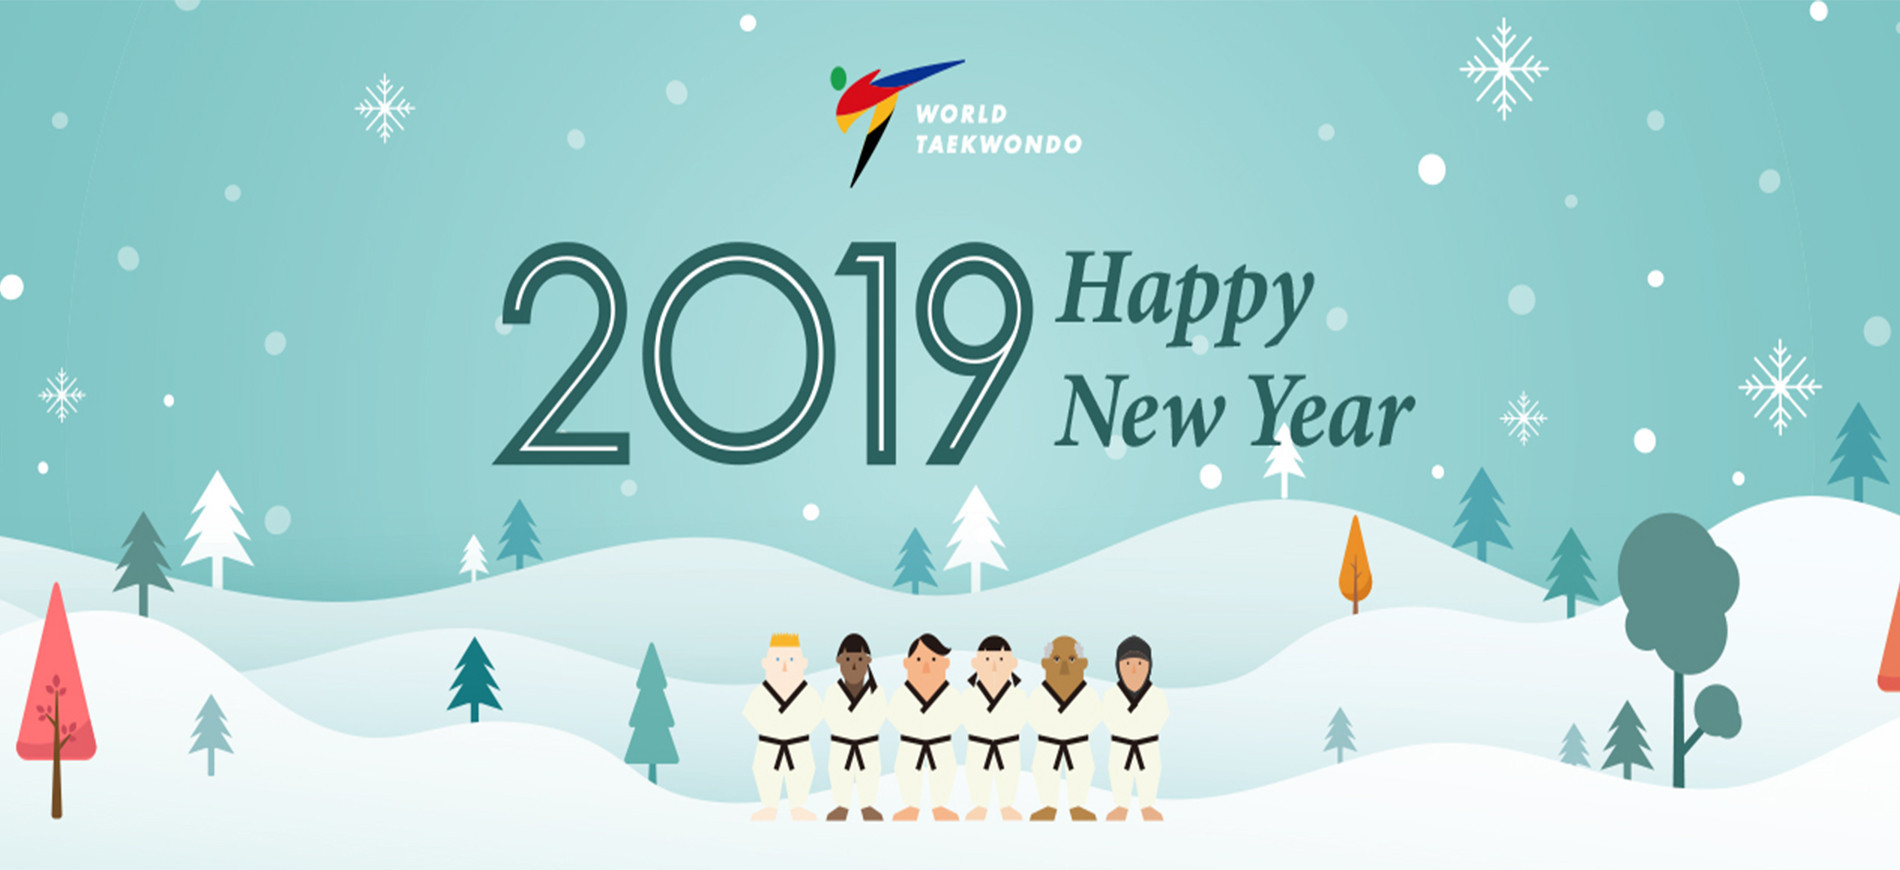 World Taekwondo President highlights sport's continued growth in New Year's message